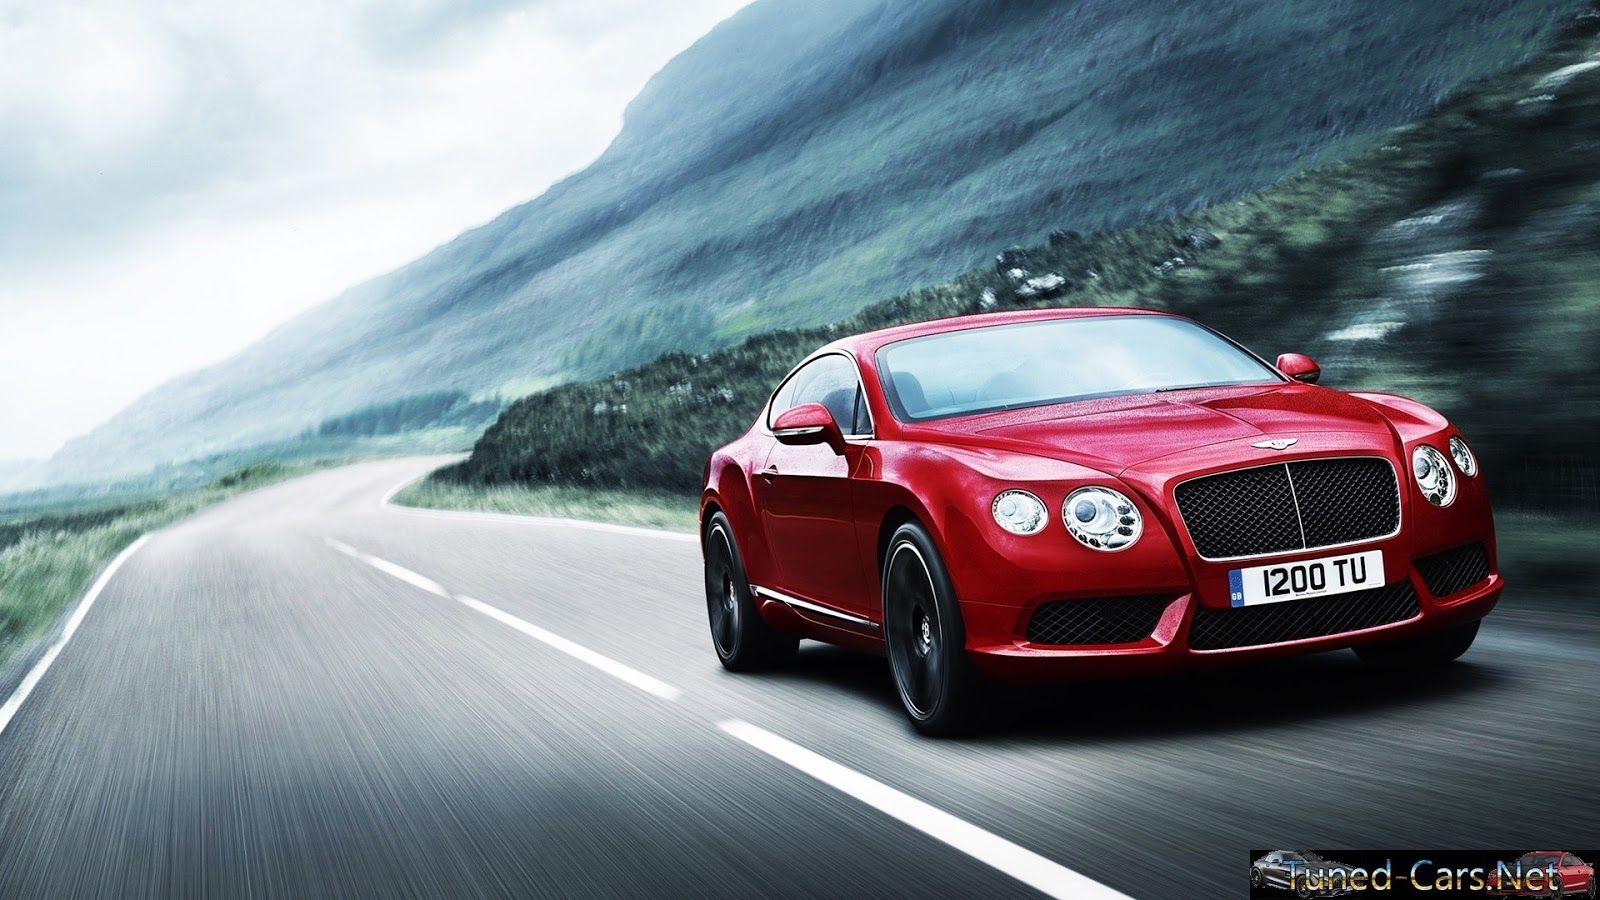 Tuned Cars Wallpaper: Bentley Continental 2012 Red